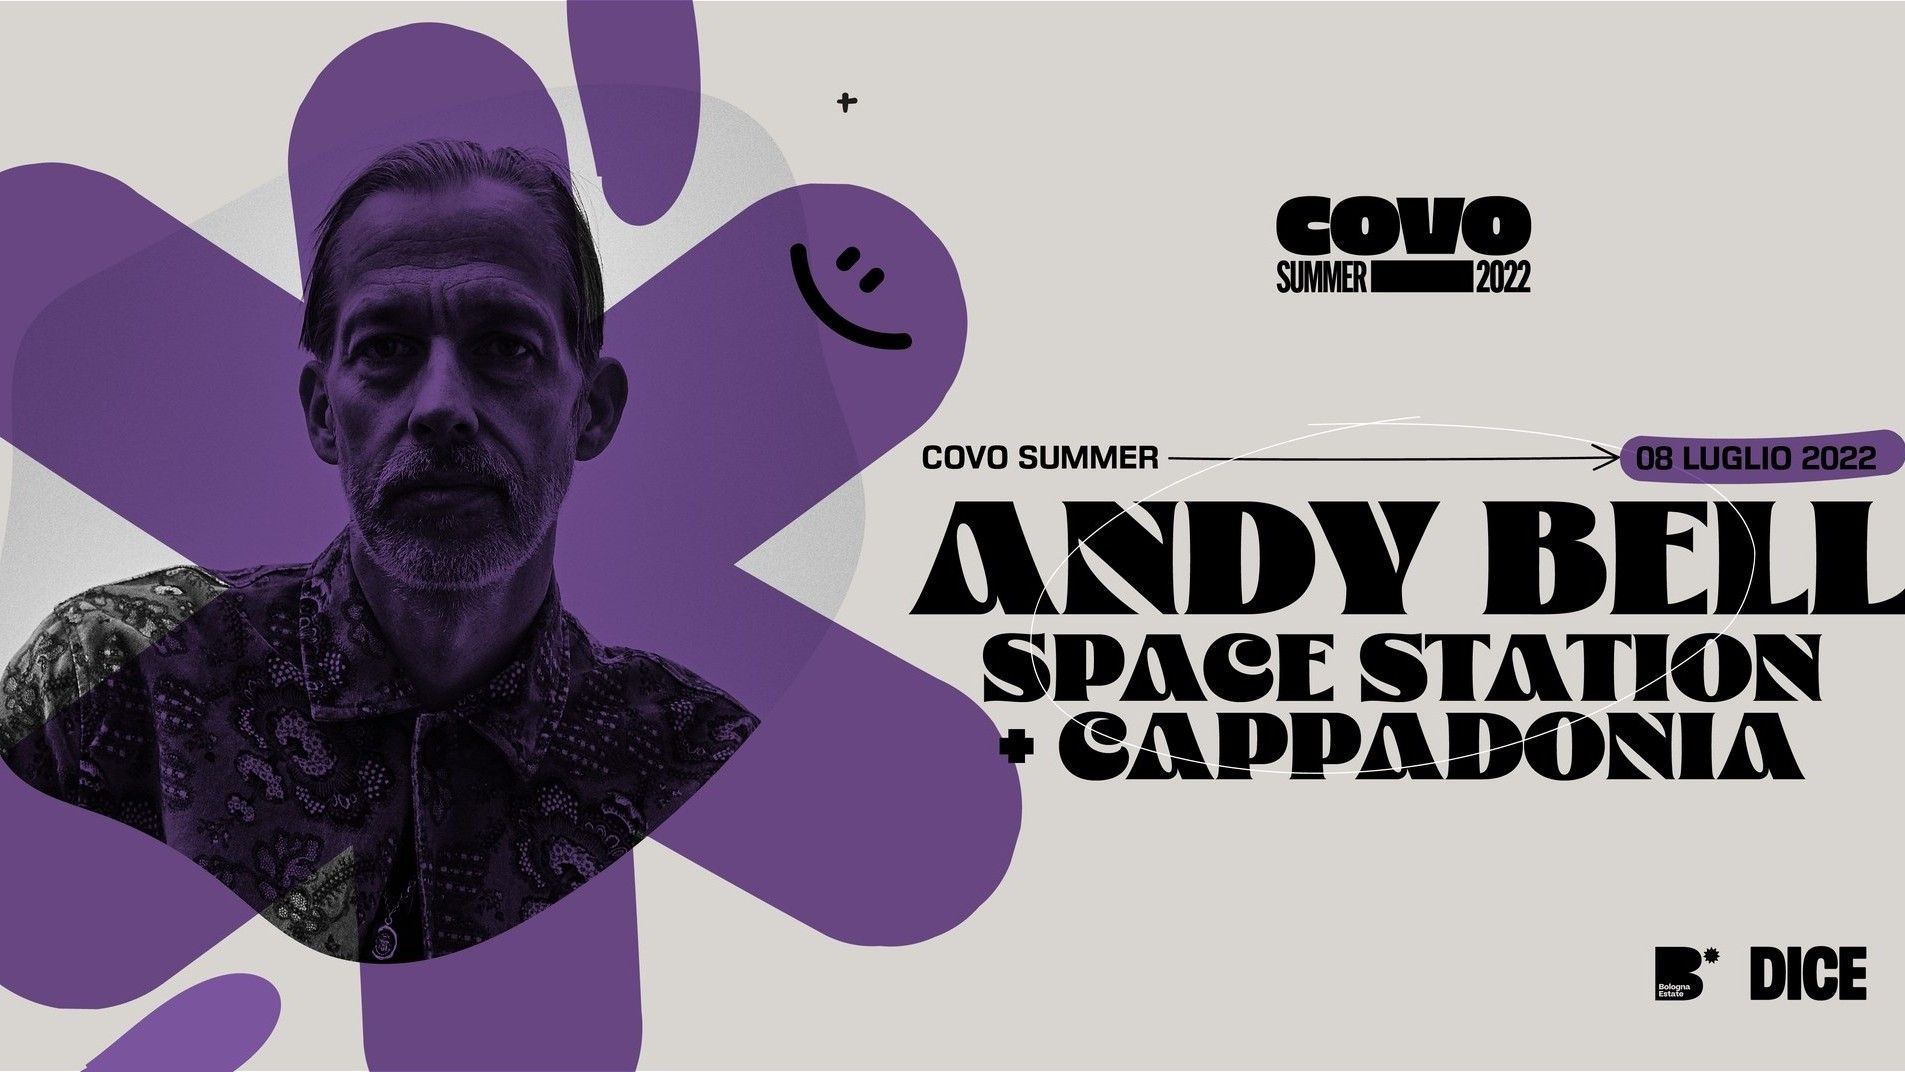 Andy Bell Space Station + Cappadonia